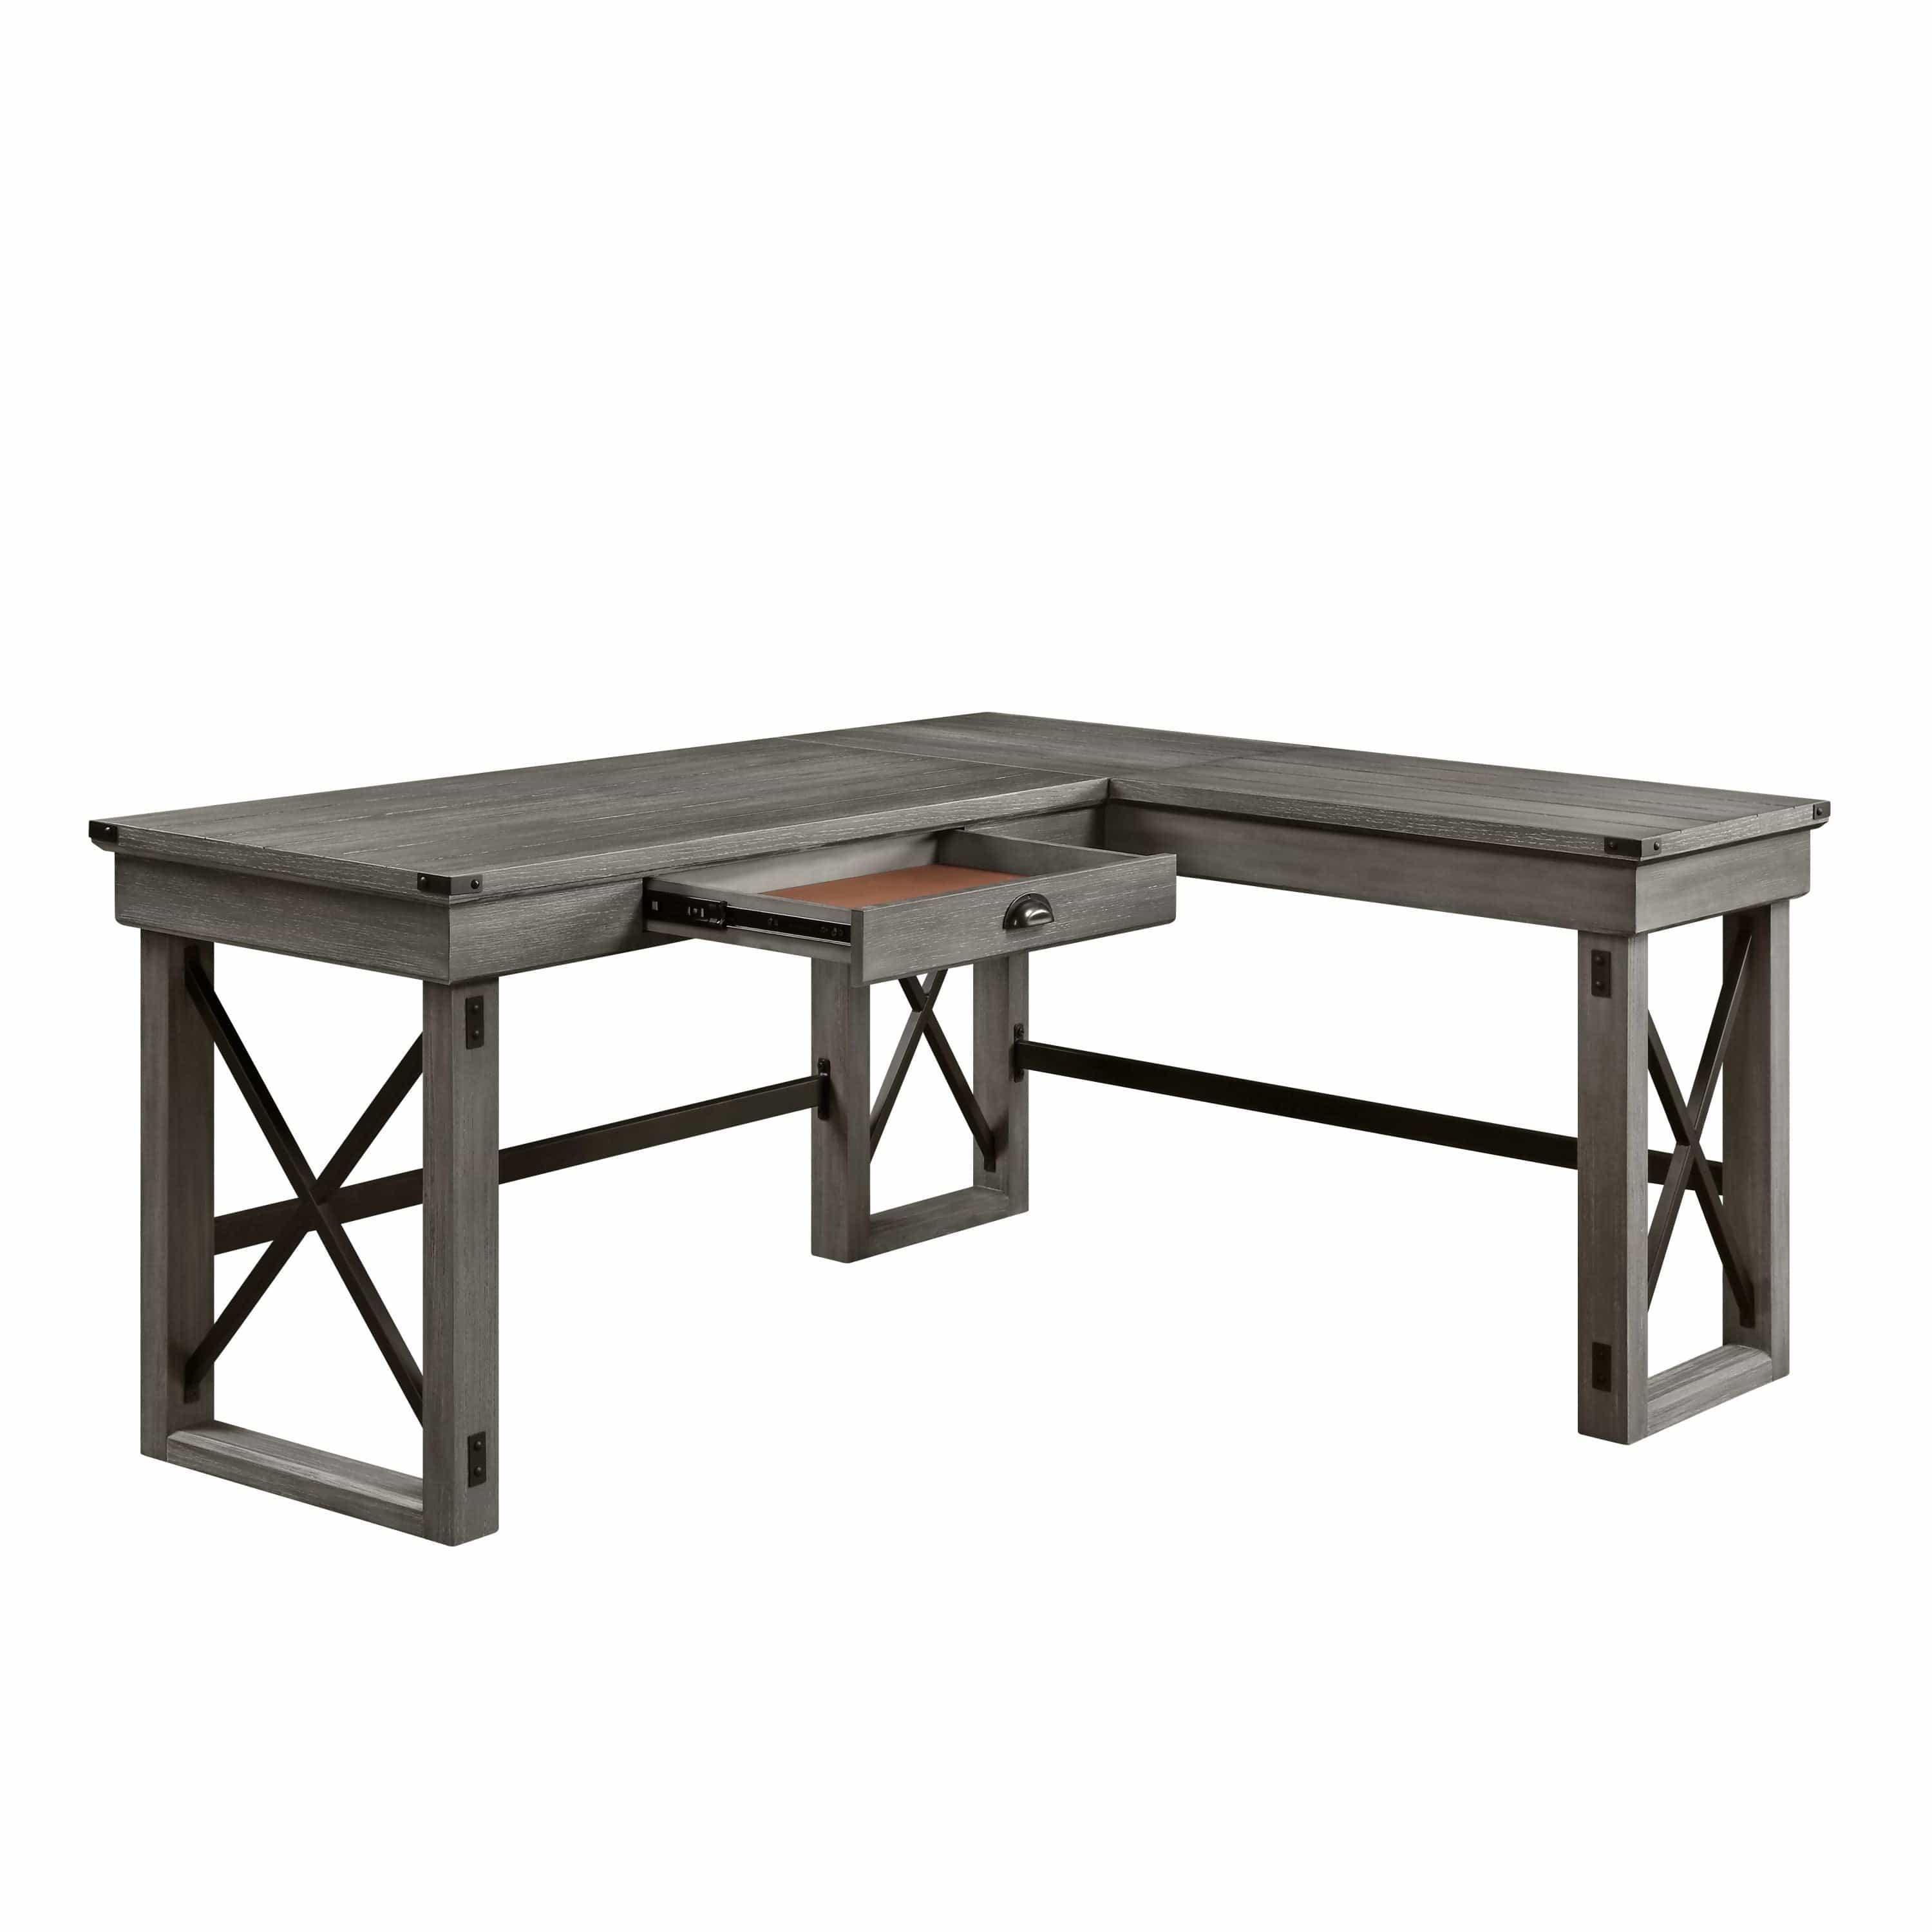 Shop ACME Talmar Writing Desk w/Lift Top in Weathered Gray Finish OF00054 Mademoiselle Home Decor